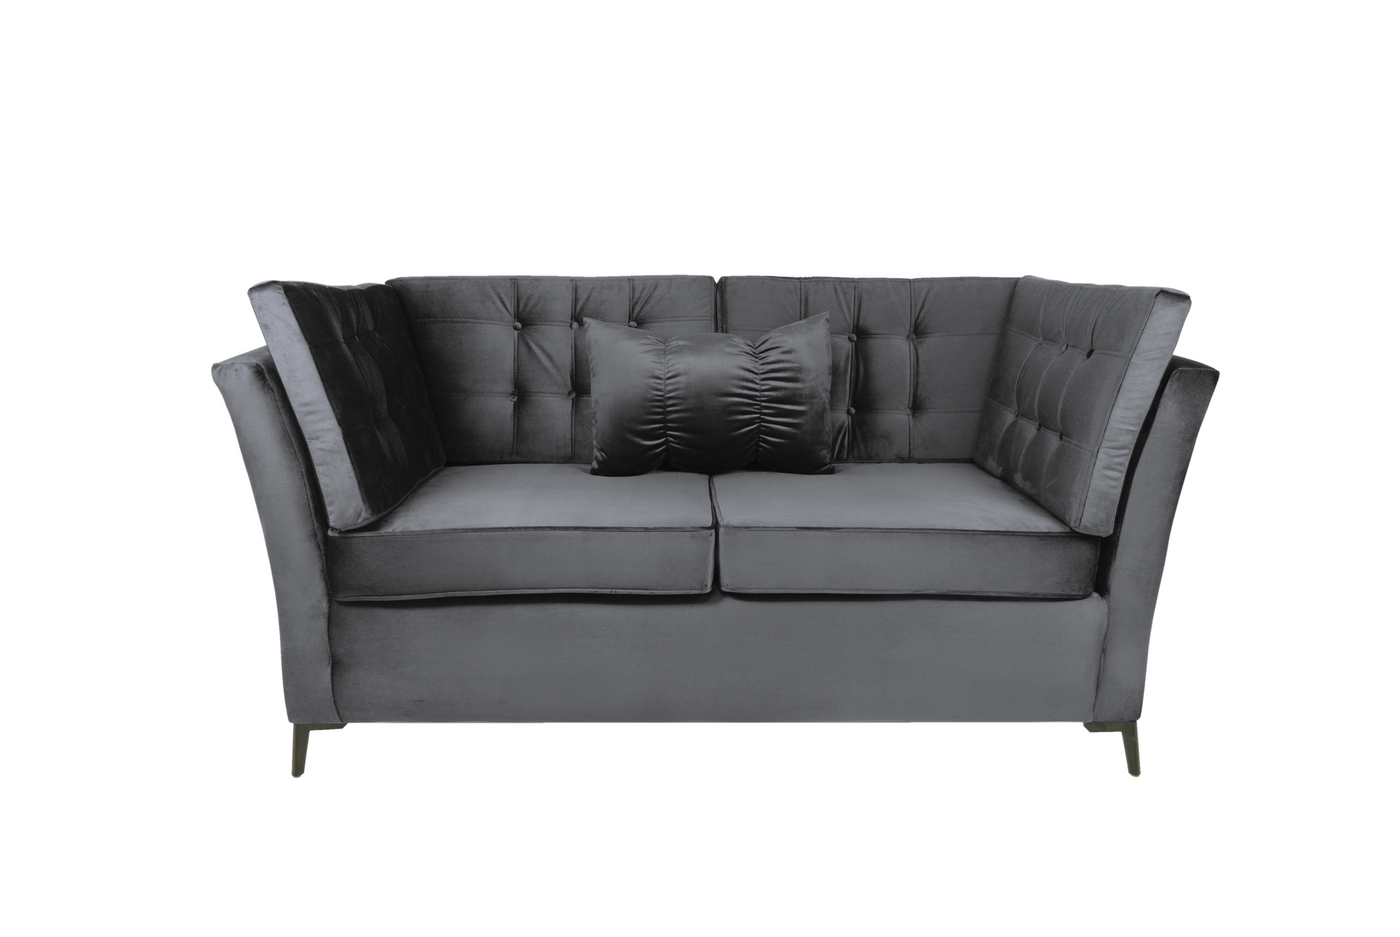 Savanah 2 Seater Couch